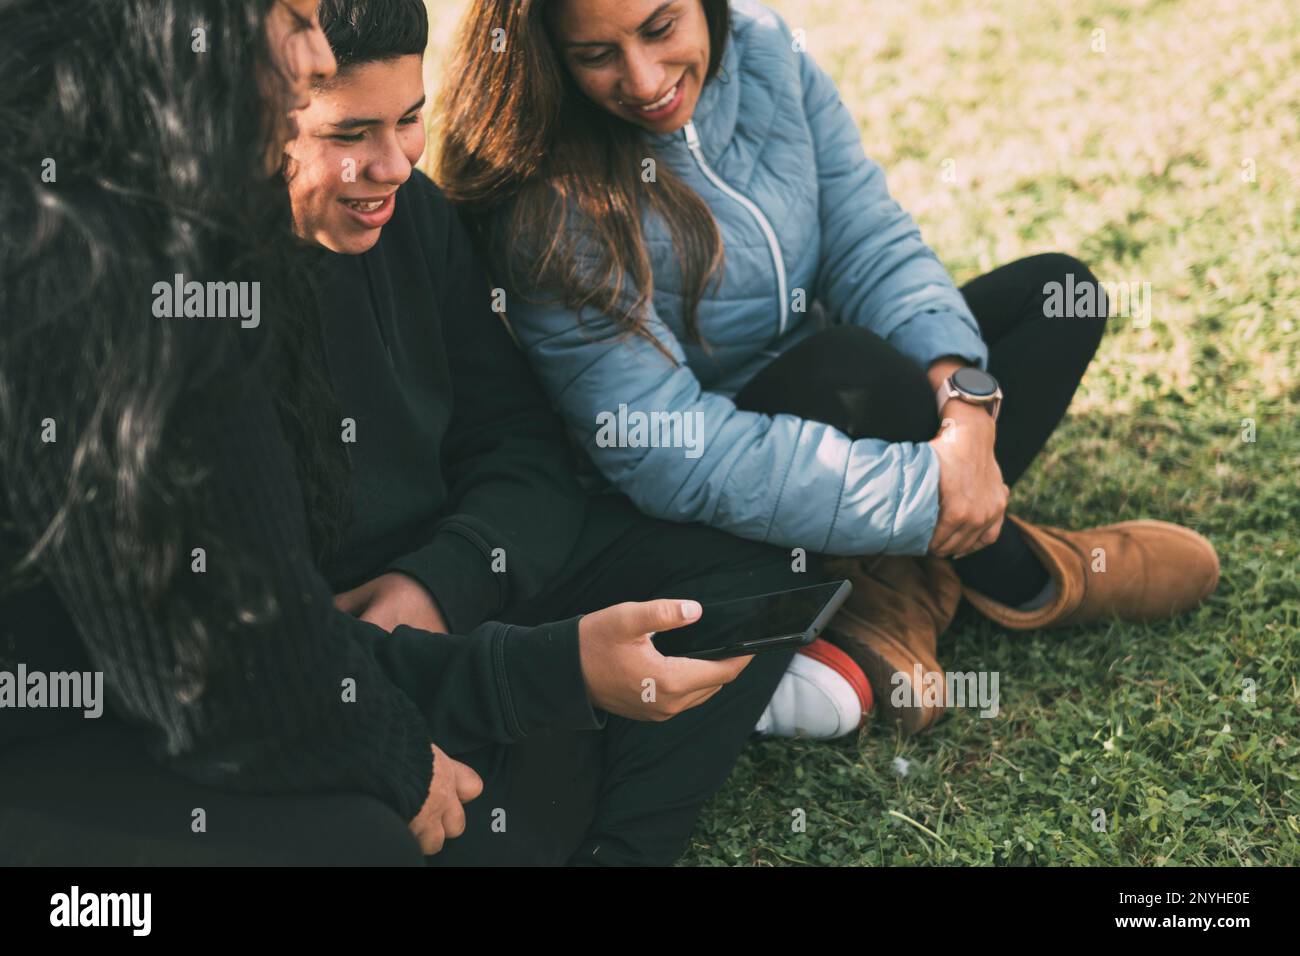 Hispanic family spending quality time together in a local park on a beautiful, sunny day. A teenage boy is sitting on the grass, holding his smartphon Stock Photo